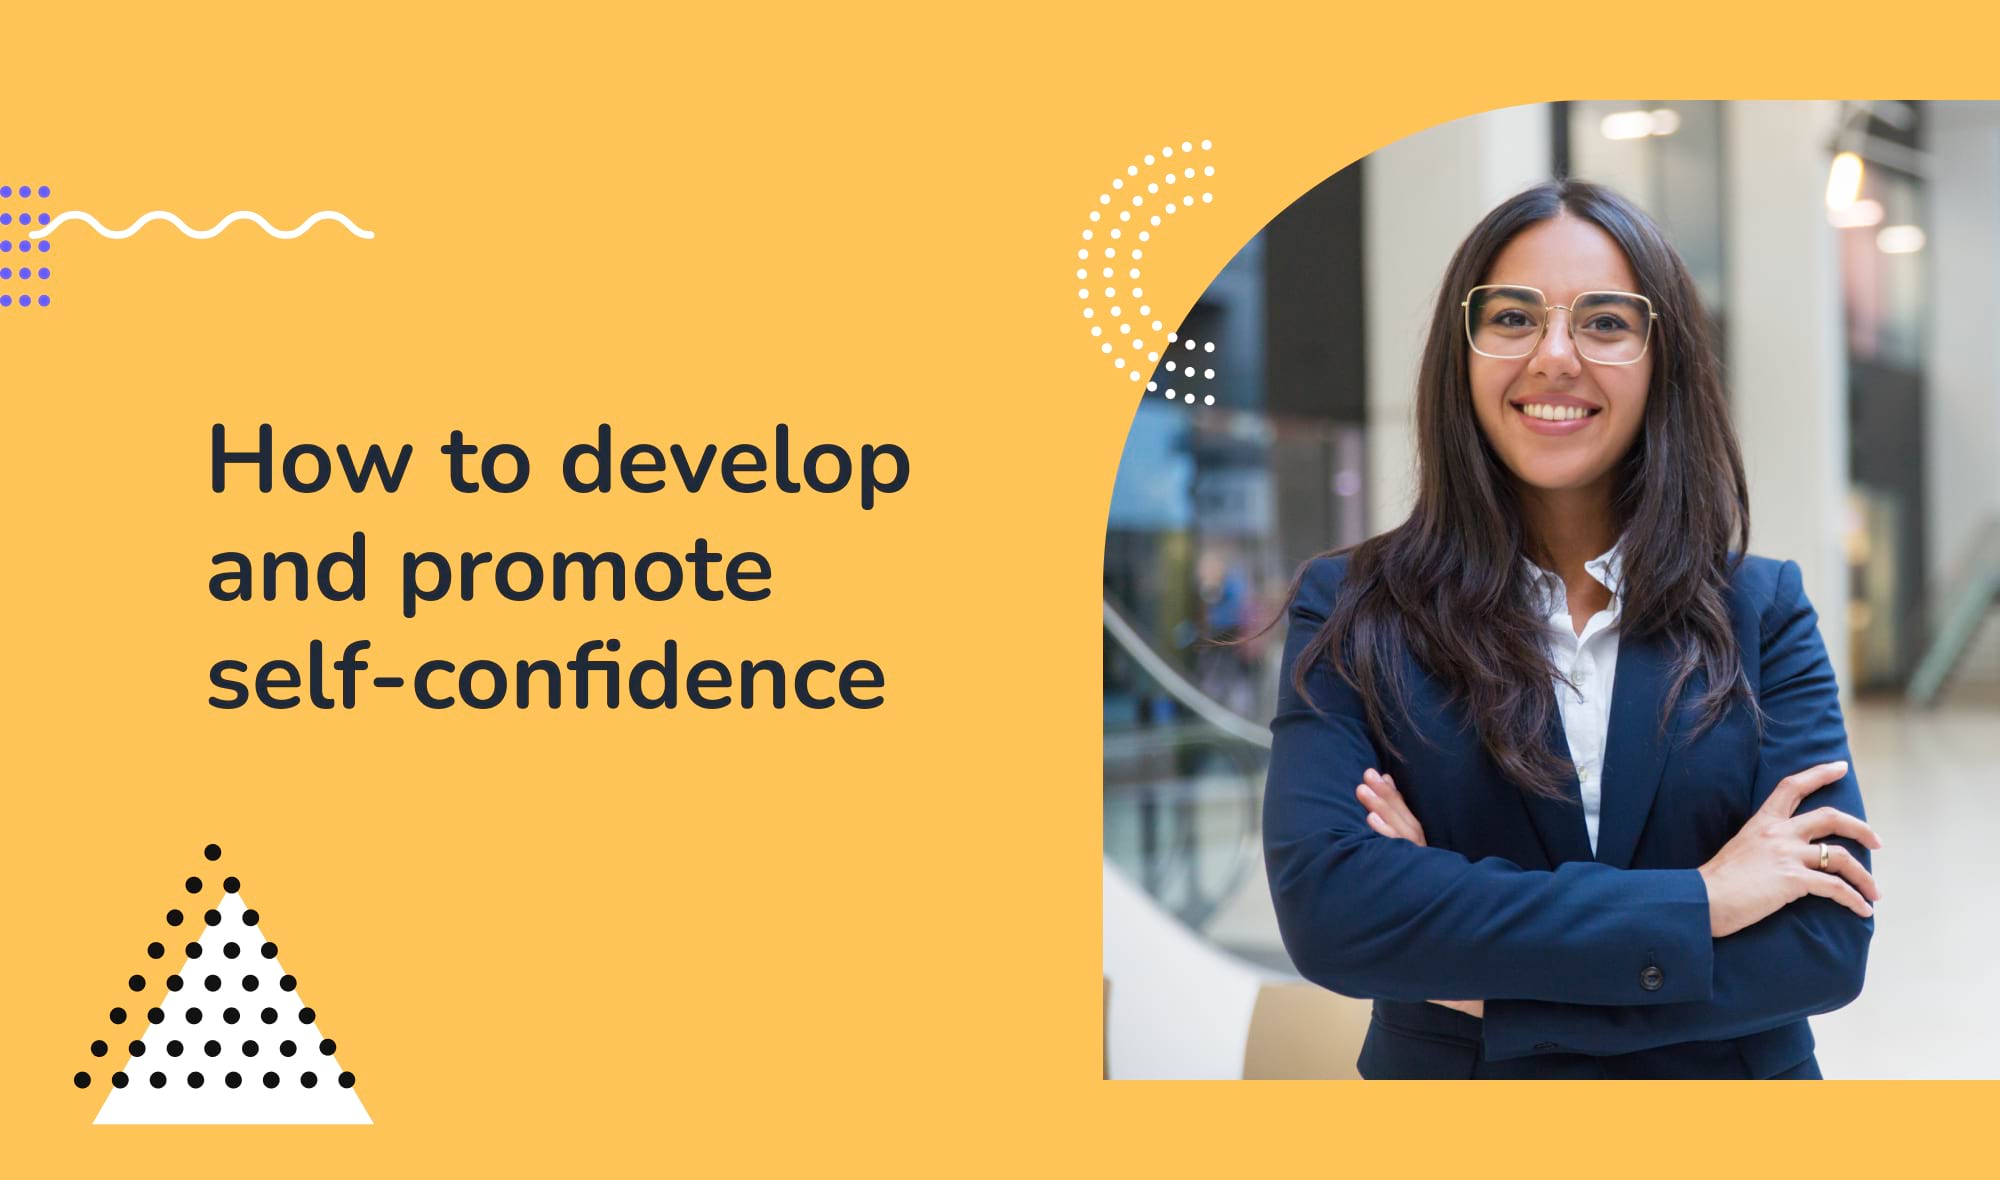 How to develop and promote self-confidence